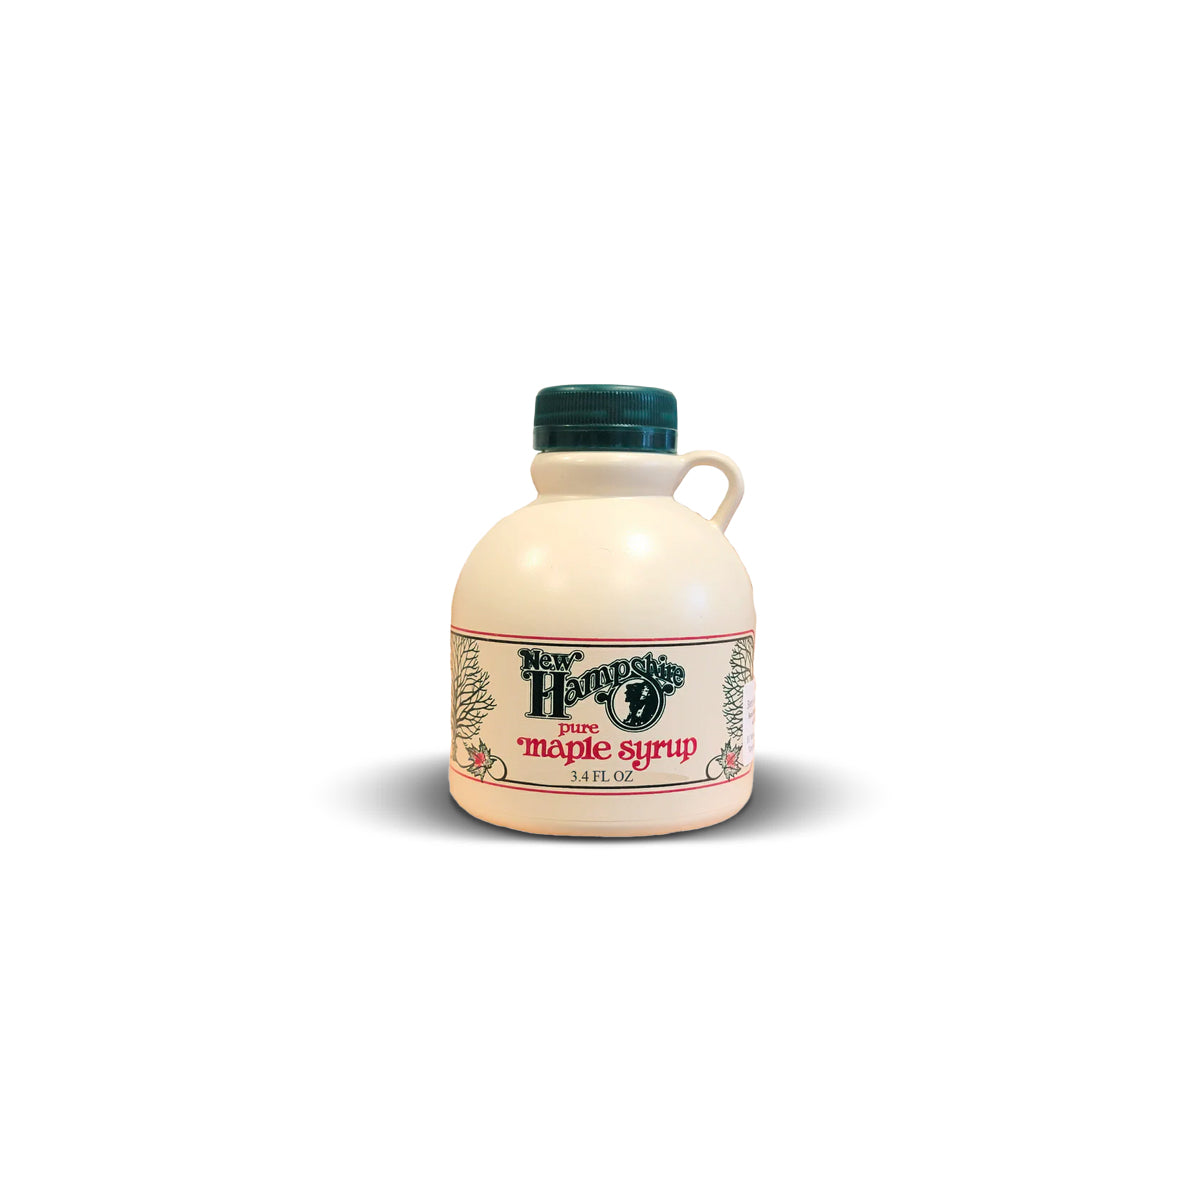 Pure New Hampshire Maple Syrup in Plastic Jugs (All Sizes) Mini 3.4 oz / Dark Robust